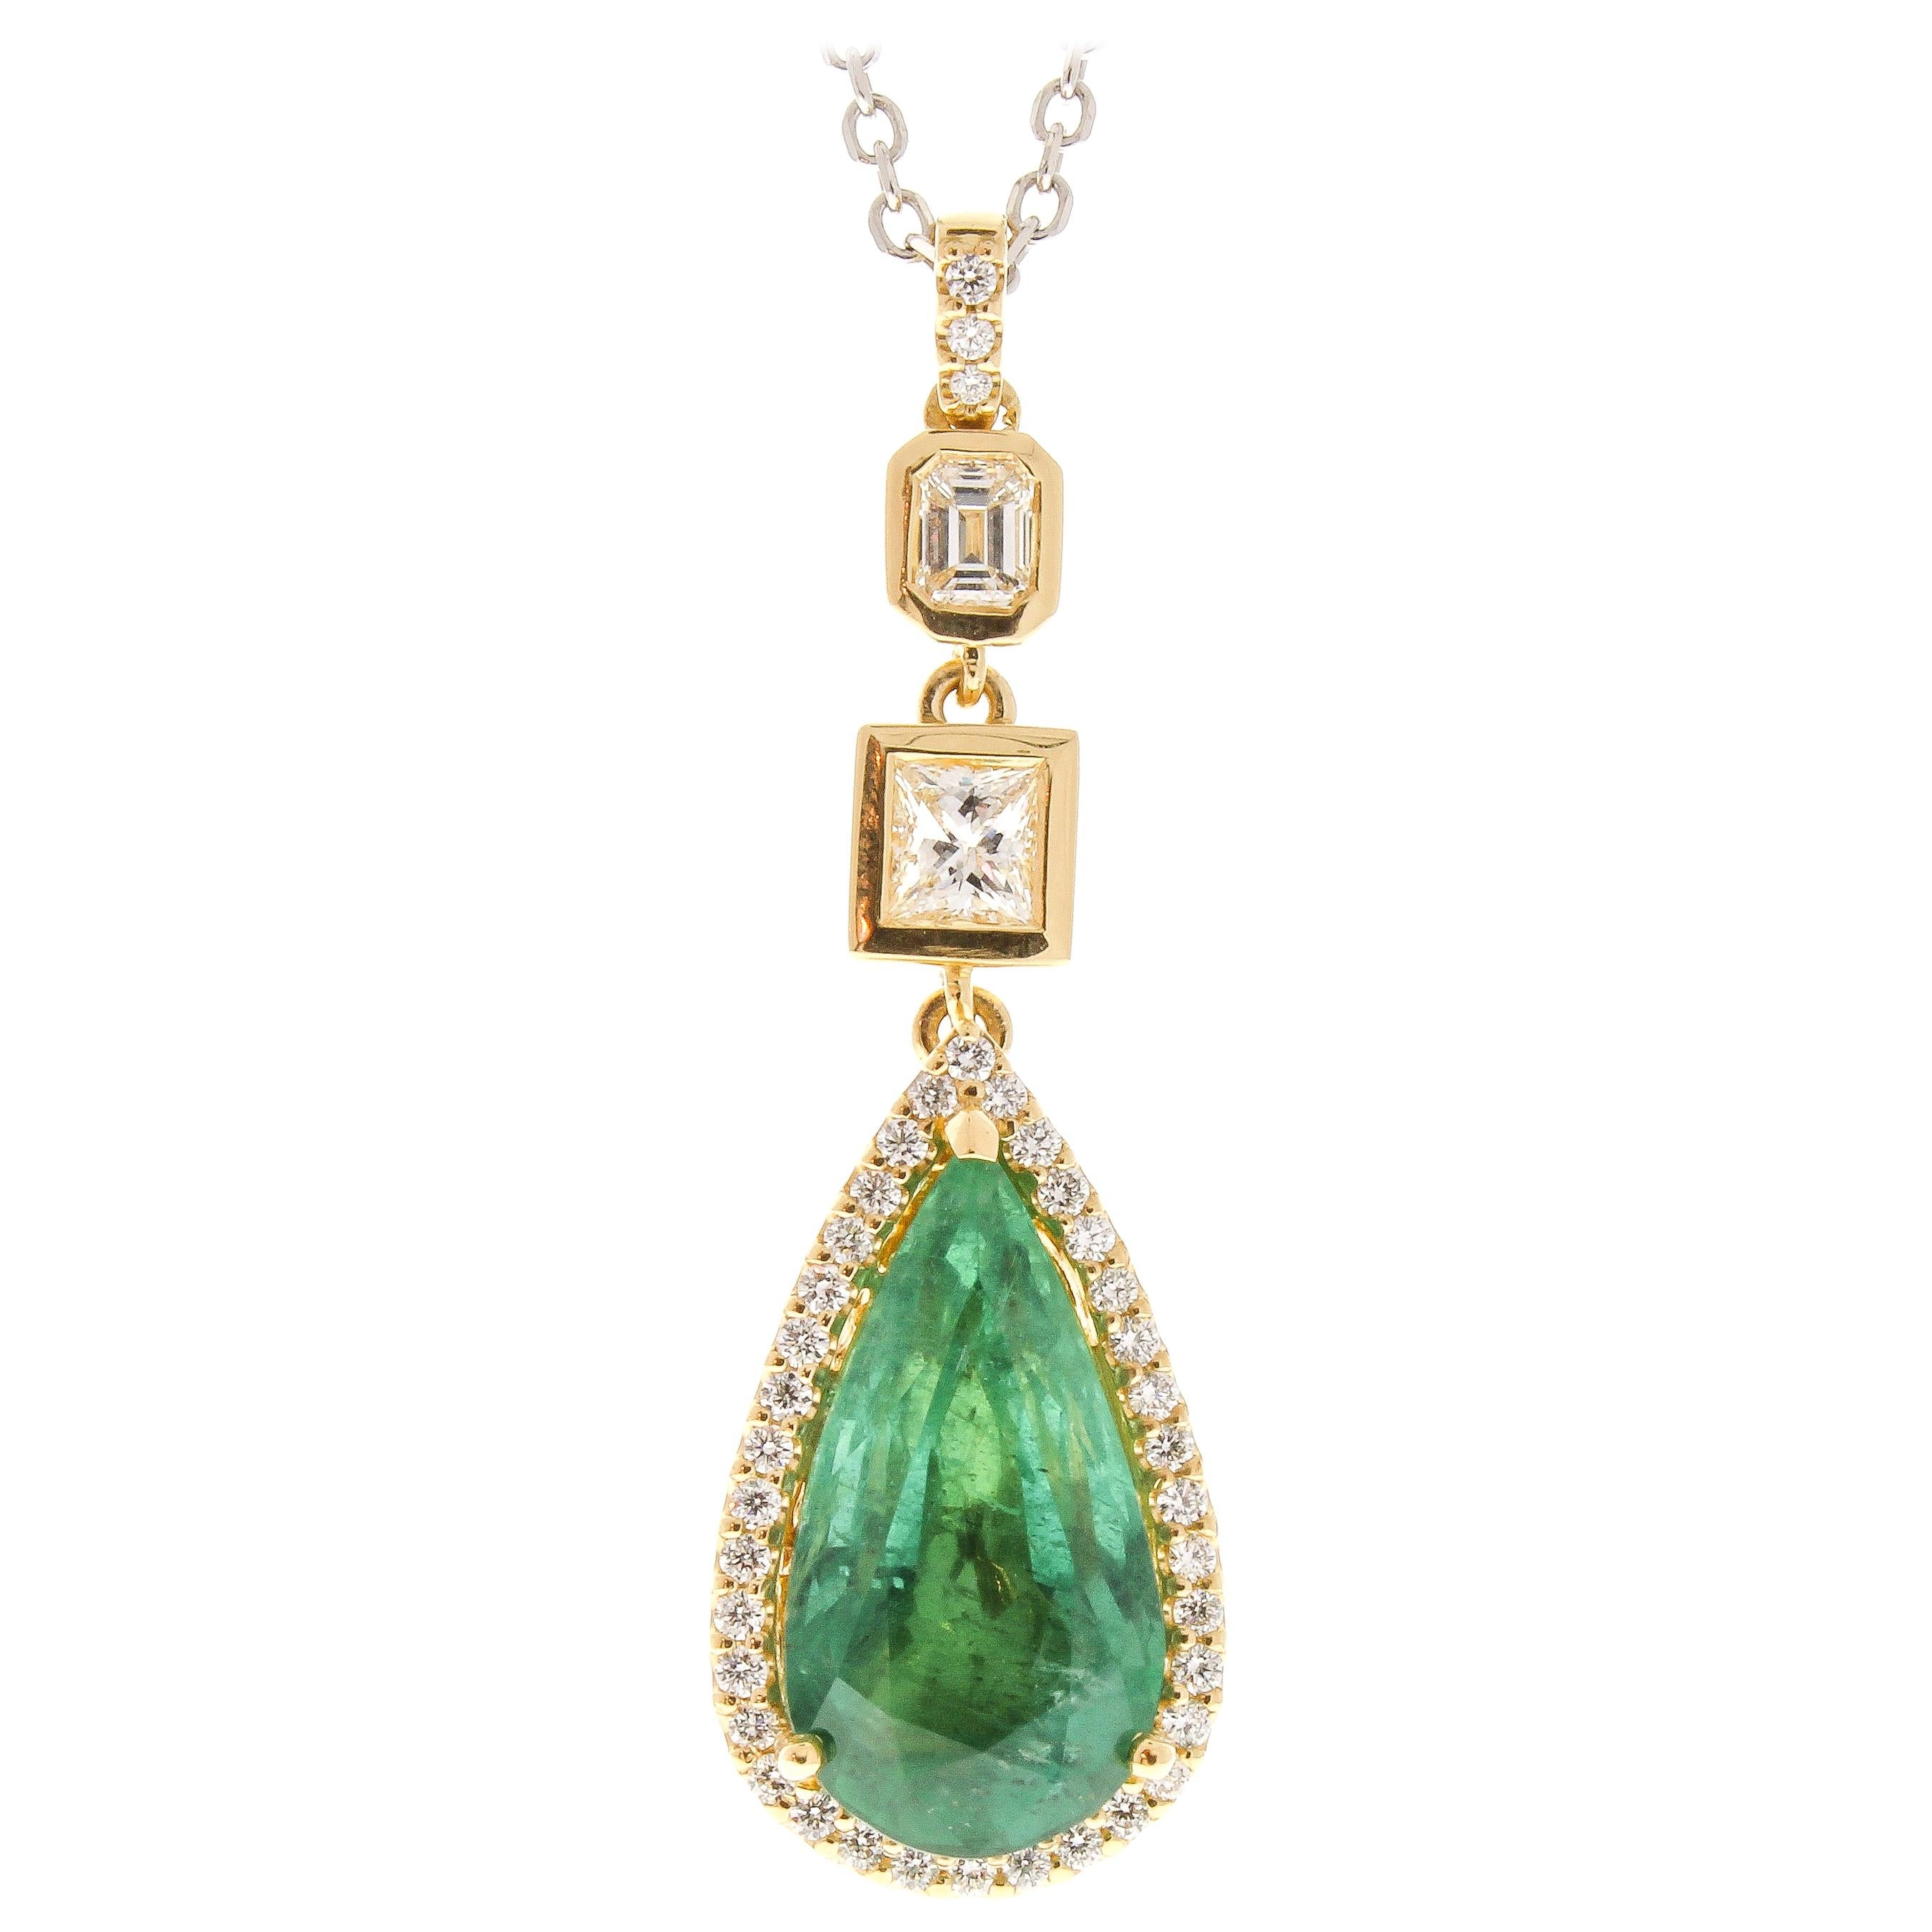 6.00 Carat Pear Shape Emerald and Diamond For Sale at 1stDibs